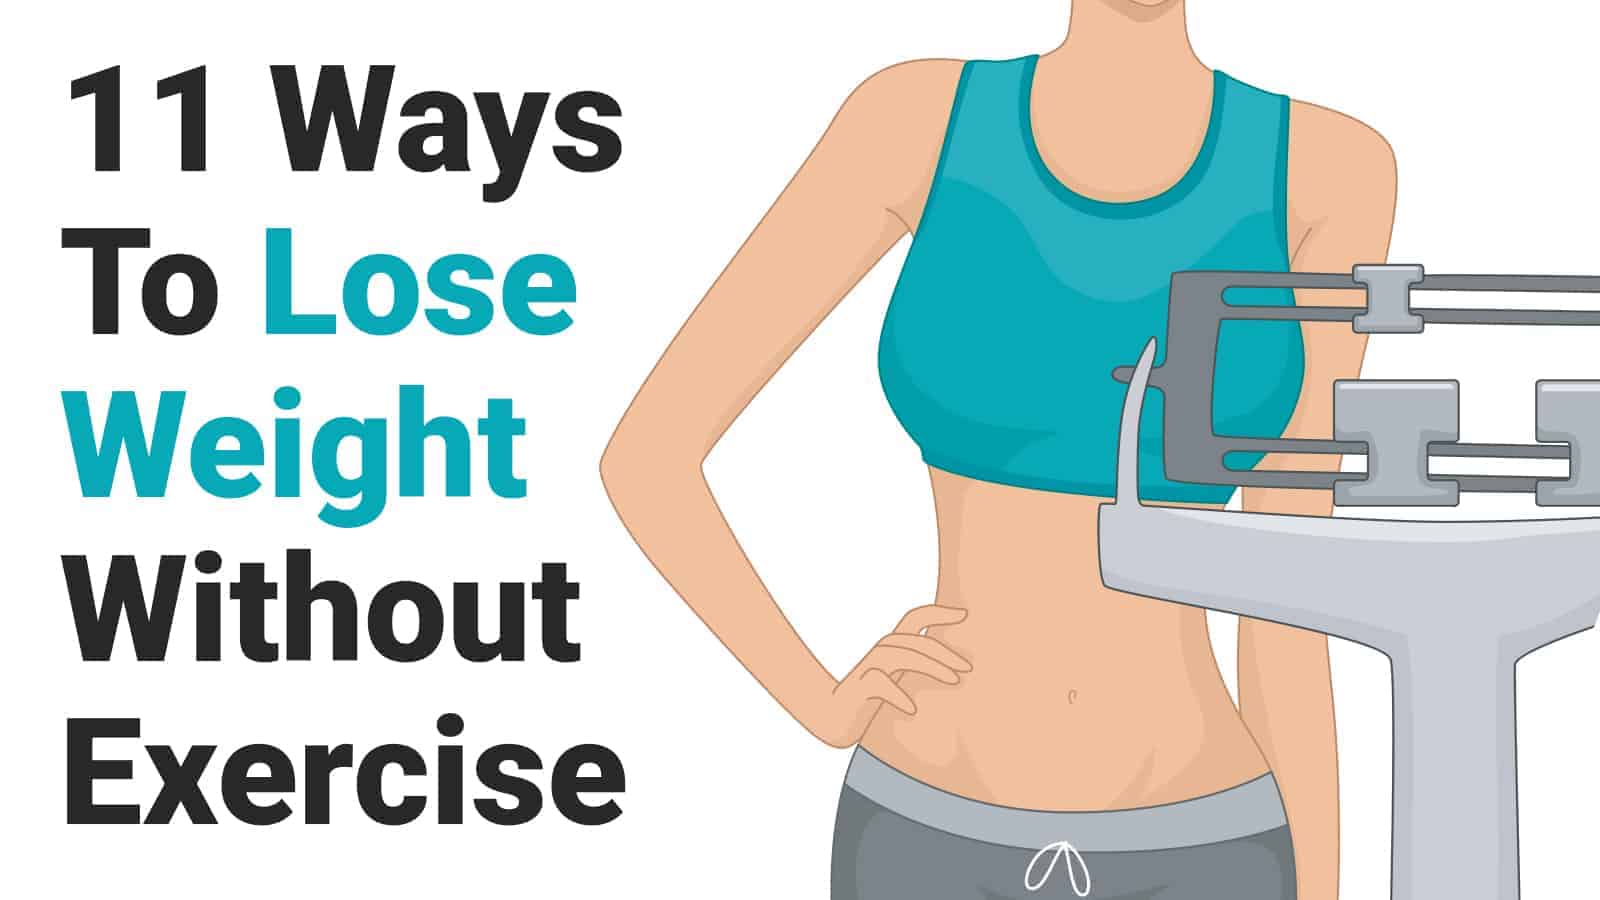 How to Lose Weight: A Complete Guide to Achieving Your Weight Loss Goals